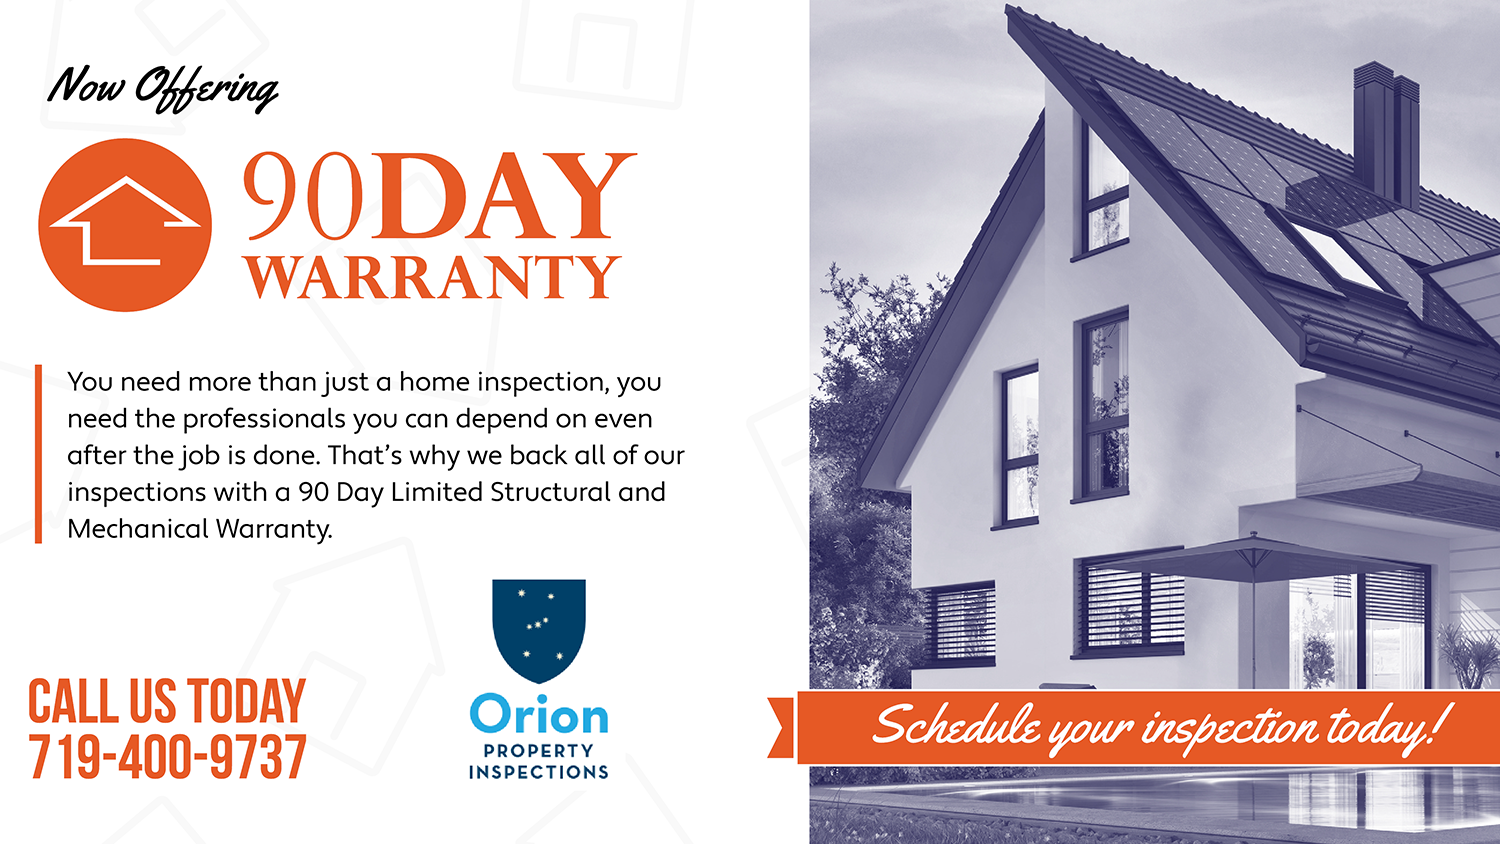 We back all of our inspection with a 90-day limited structural and mechanical warranty.